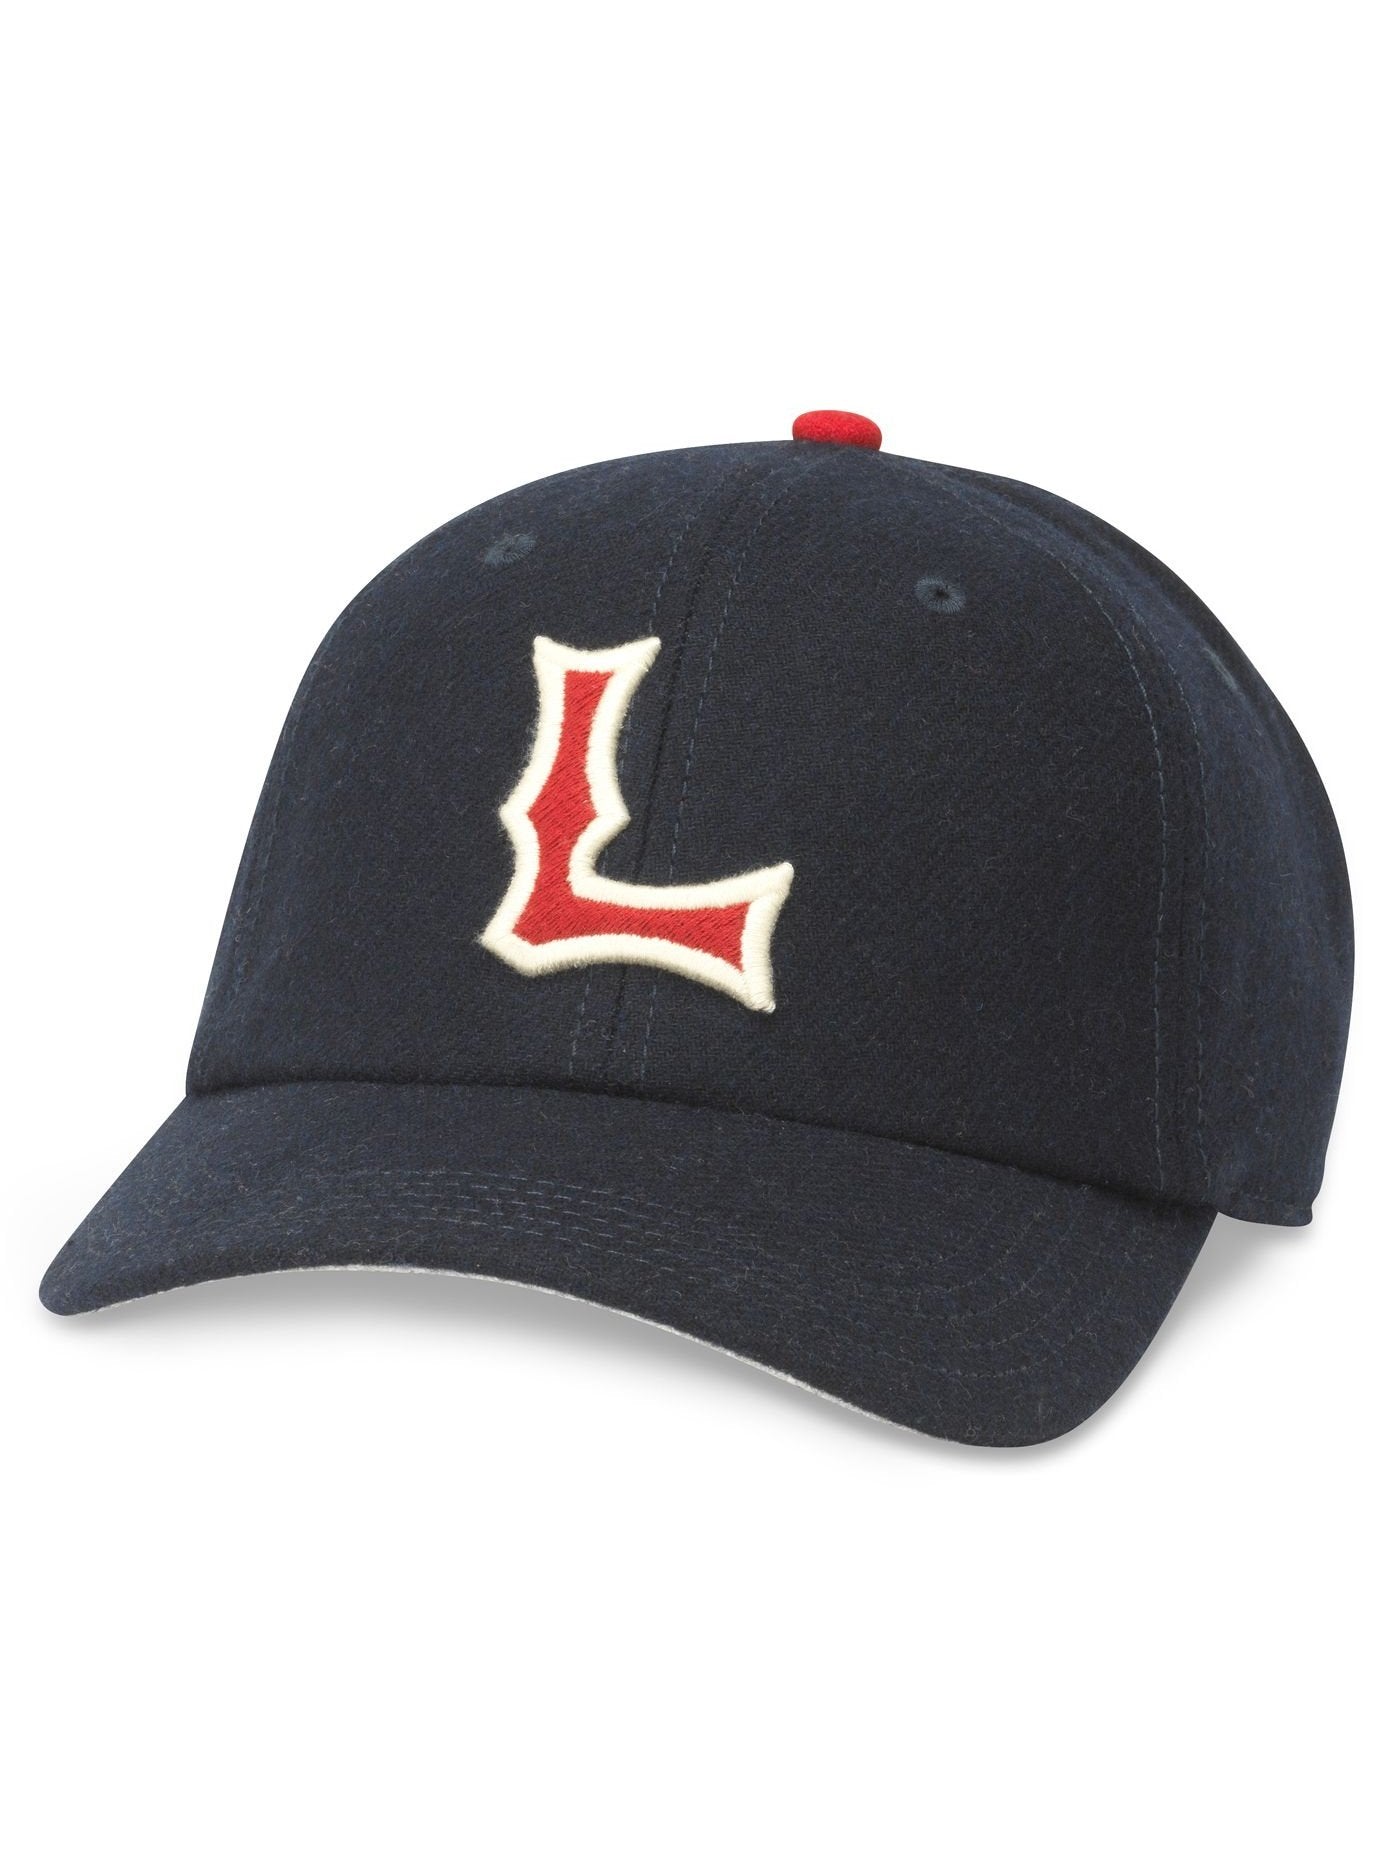 American Needle Louisville Colonels MILB Archive Legend Cap Navy Red 21005A-LCO.